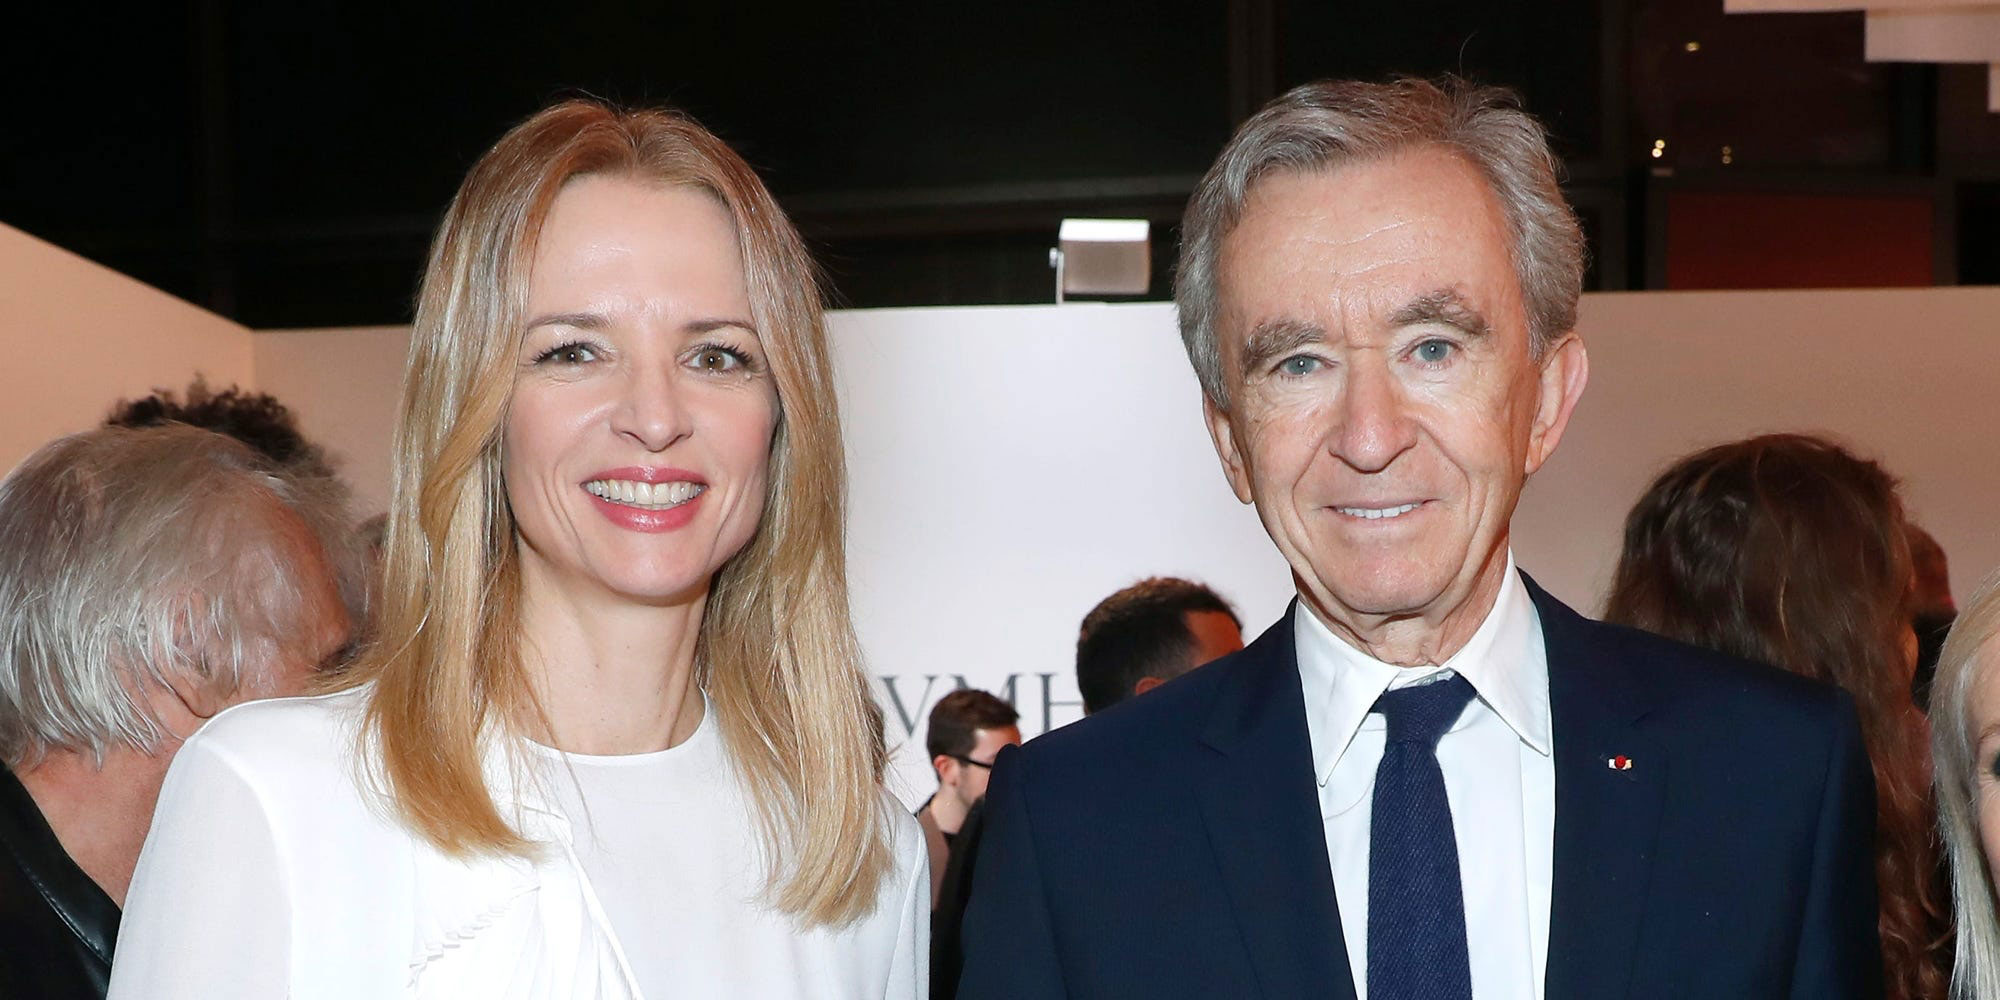 LVMH chairman Bernard Arnault promoted his son and daughter to the position of the owner of Dior